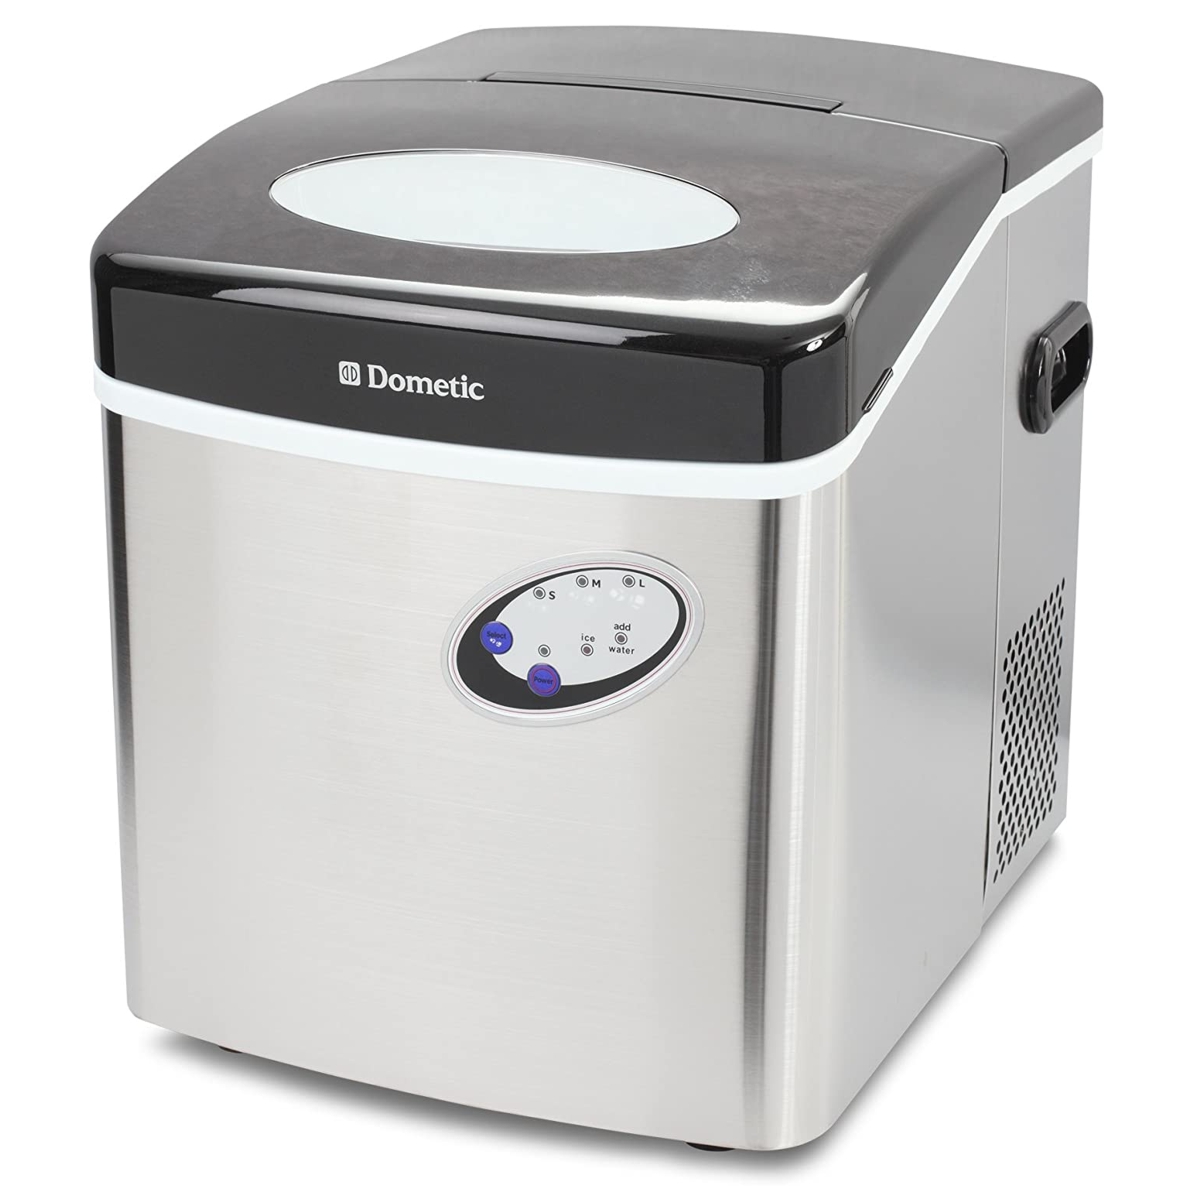 12 Best Dometic Ice Maker for 2023